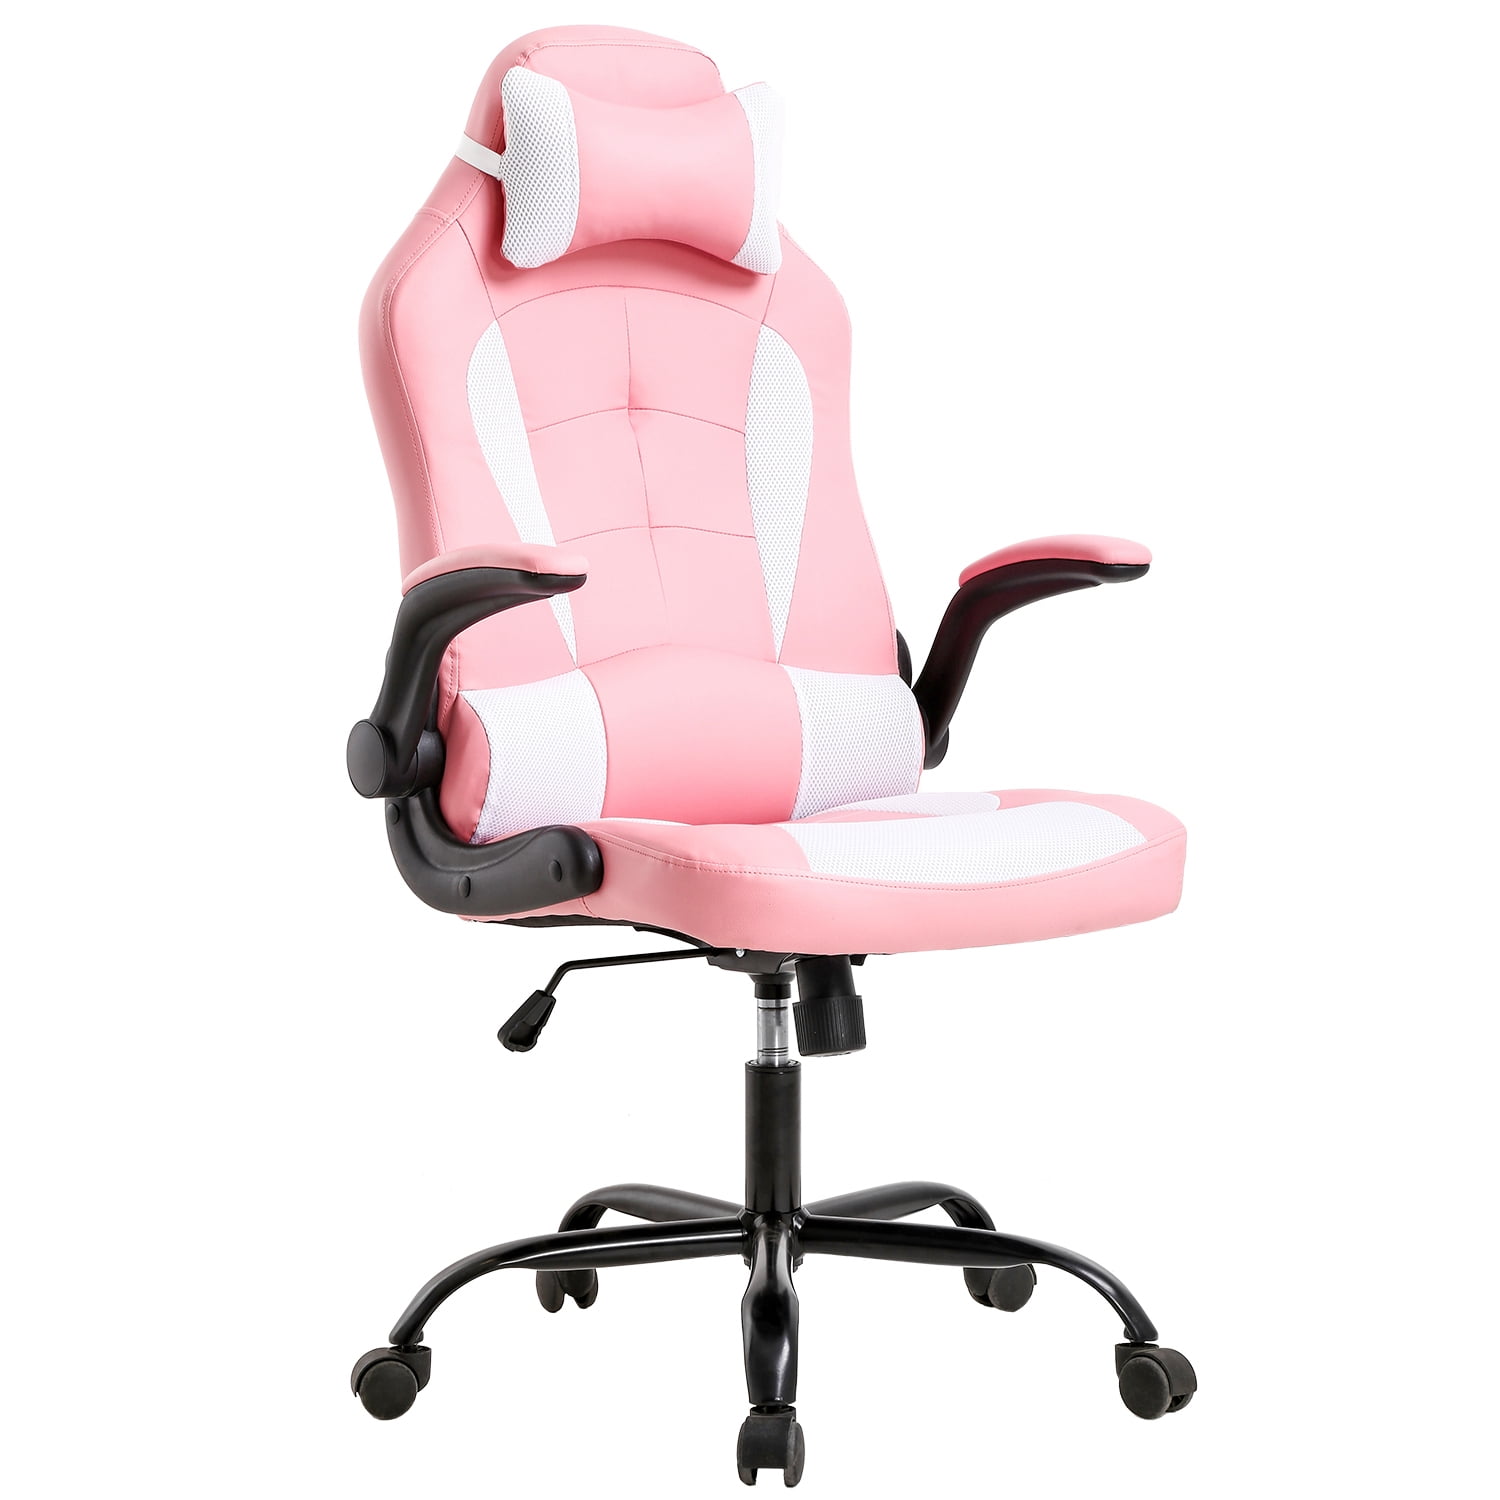 HighBack Gaming Chair Racing Office Chair Computer Desk